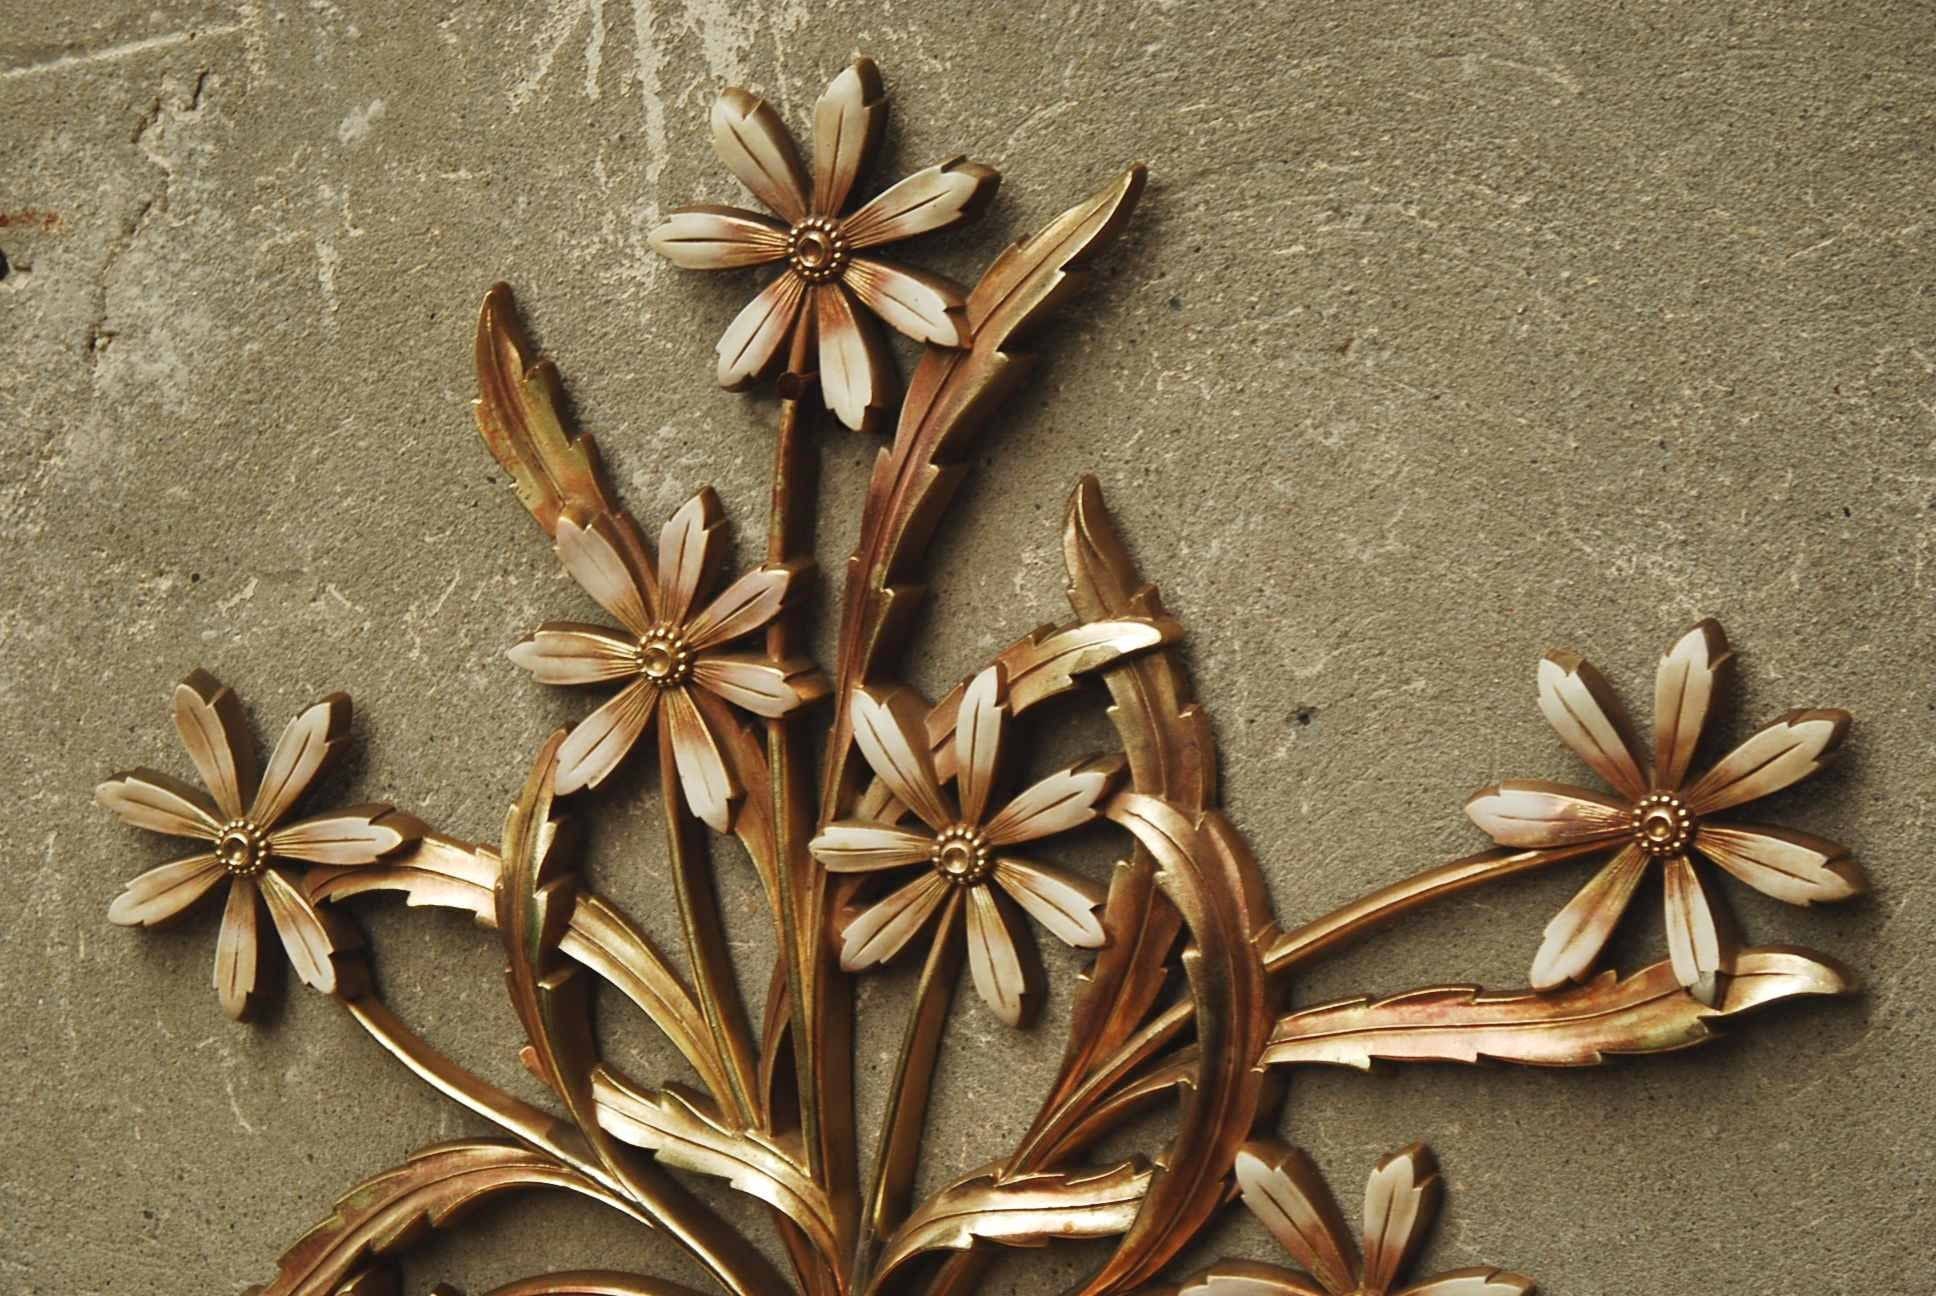 I Like Mike's Mid-Century Modern Wall Decor & Art Syroco Large Gilded Floral Arrangement Wall Hanging - Gold & White